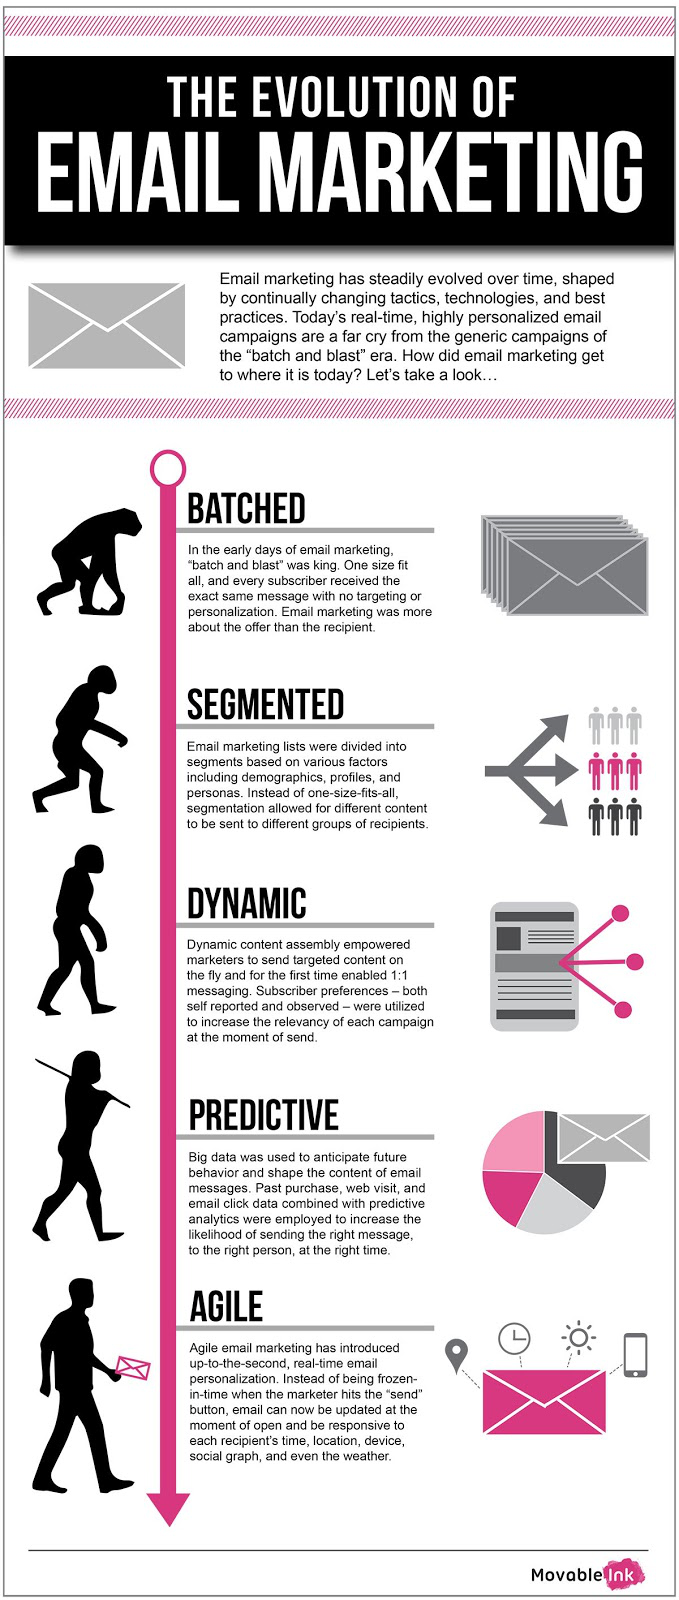 The evolution of email marketing